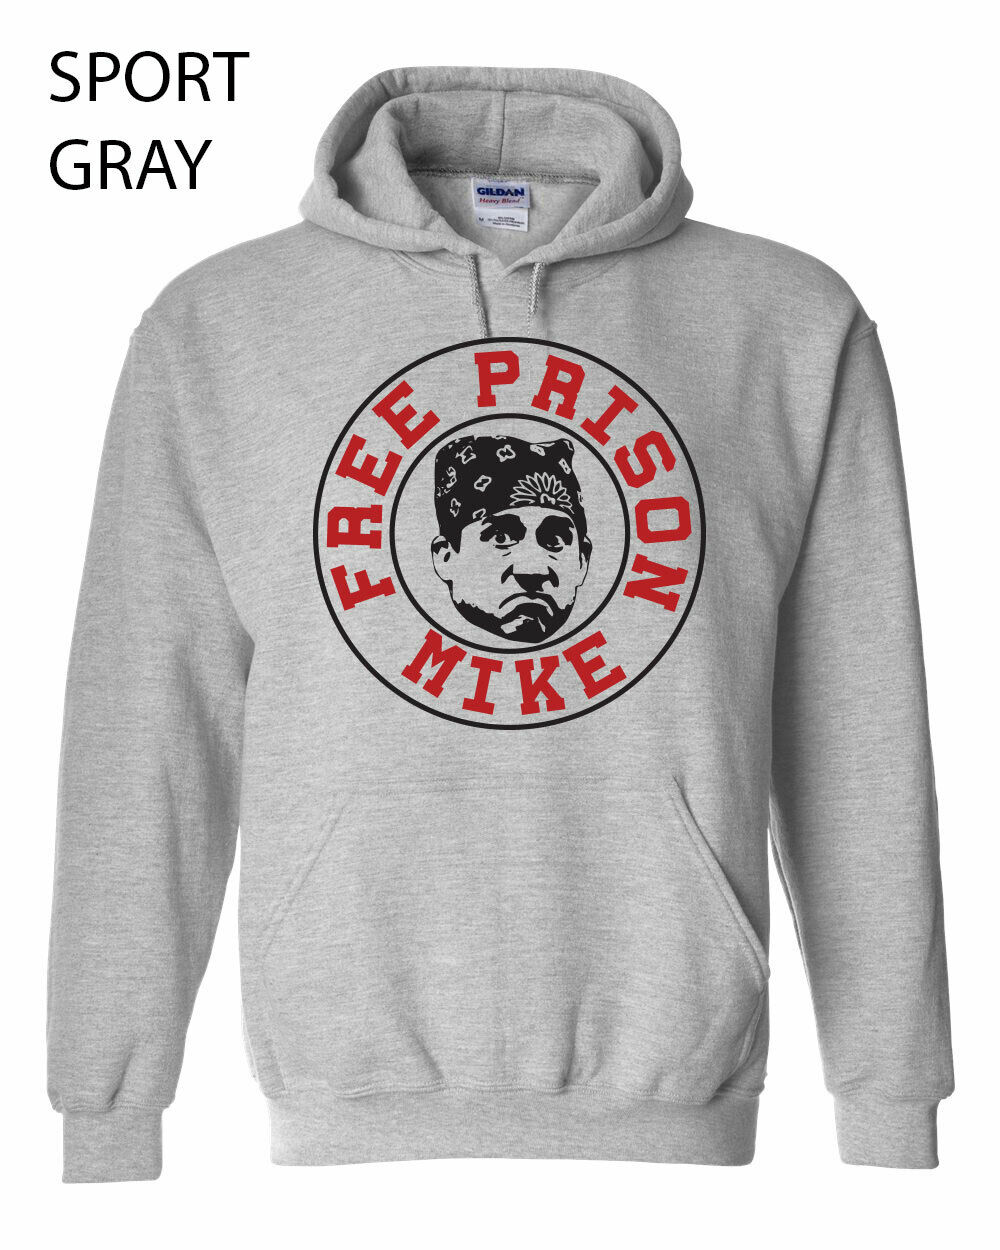 473 Free Prison Mike Hoodie funny the office costume scott party dwight schrute